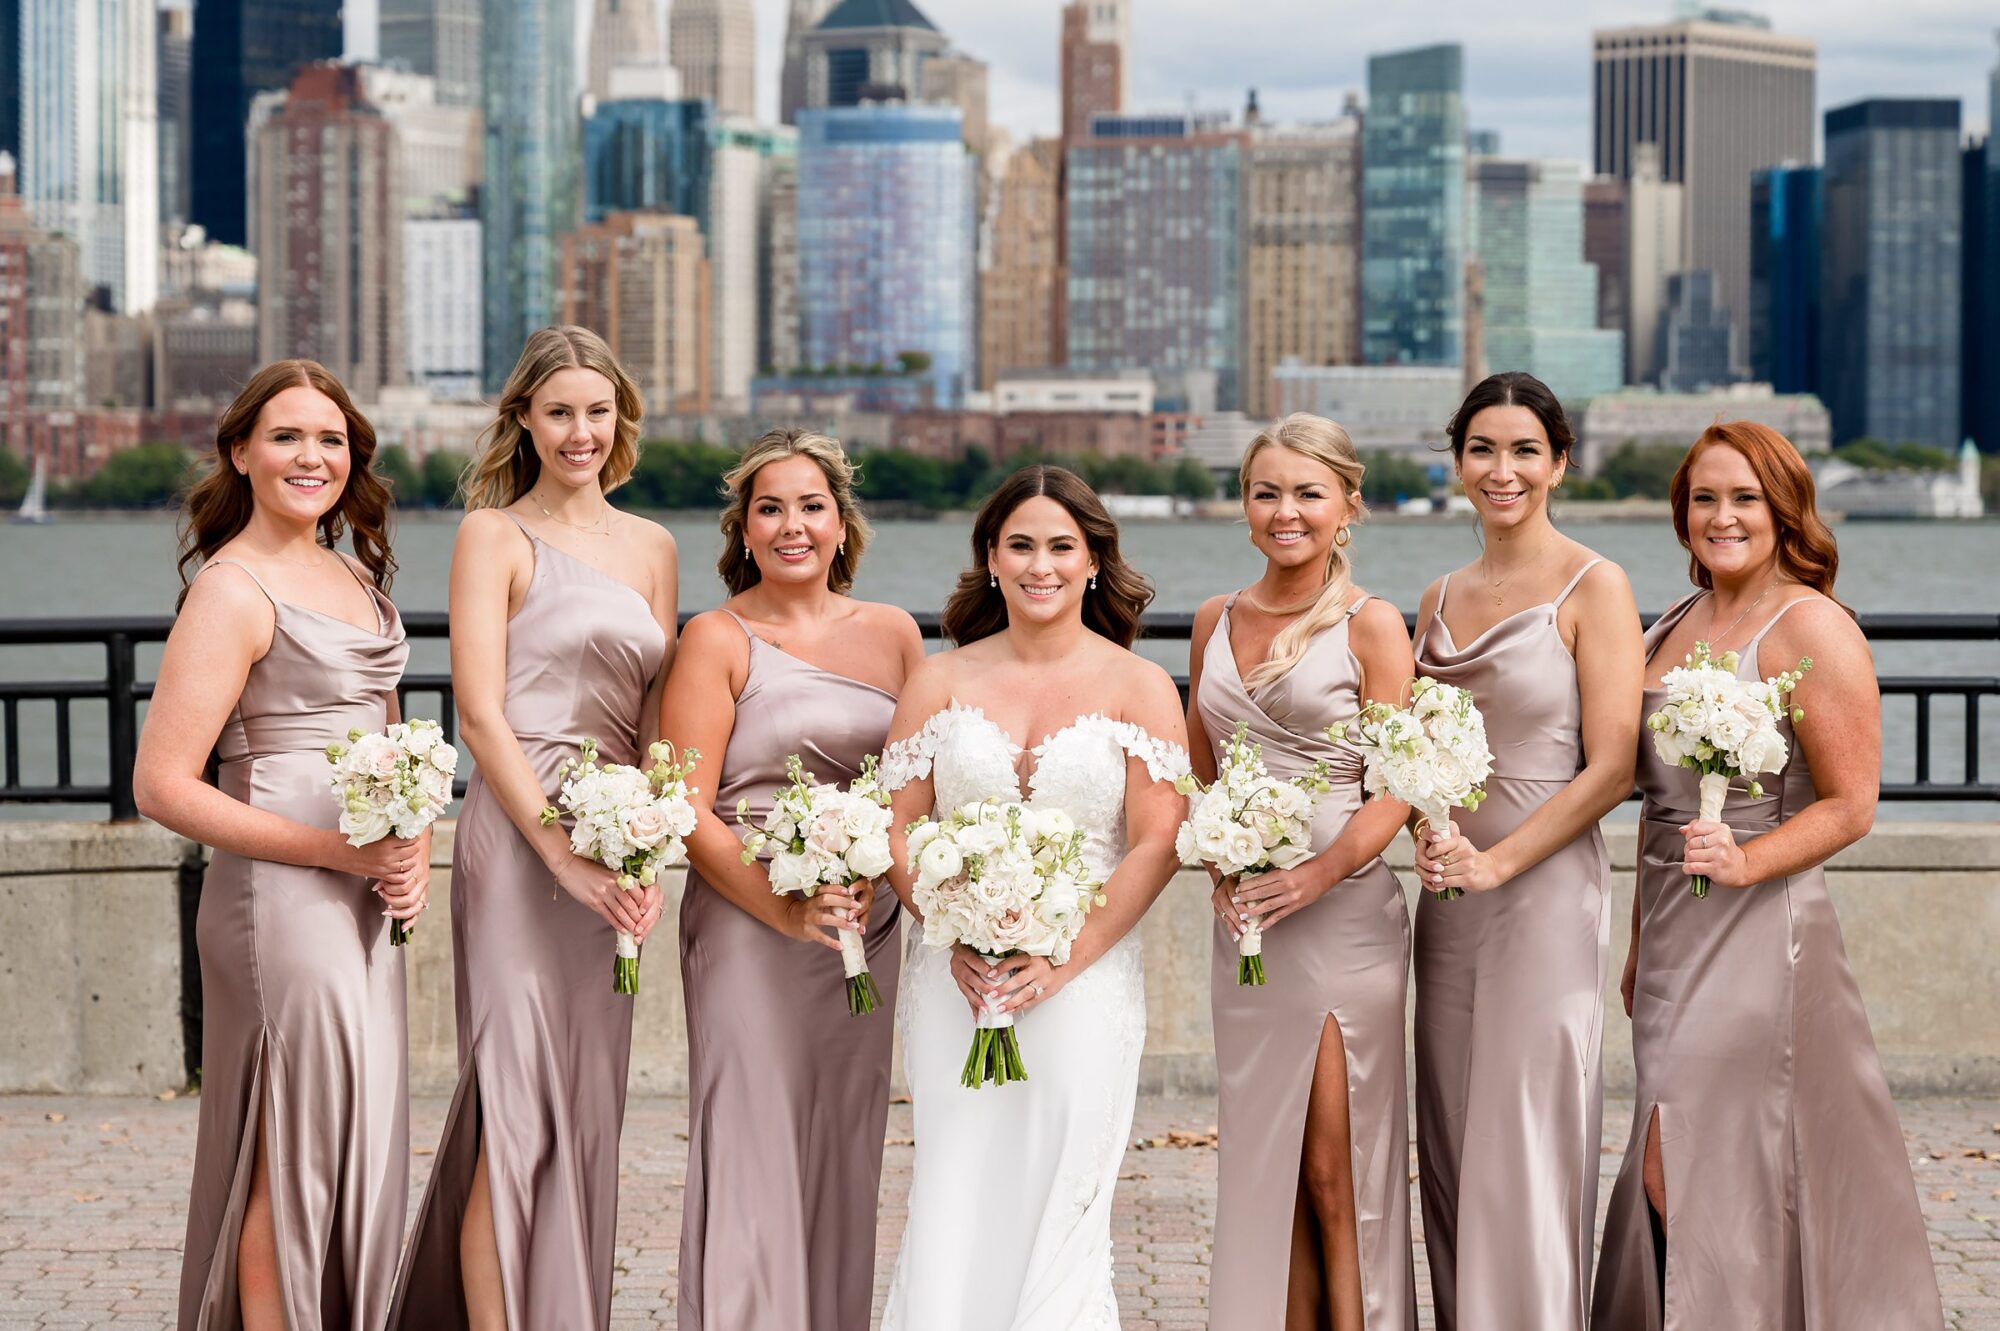 Bridesmaids pose in front of the manhattan skyline.